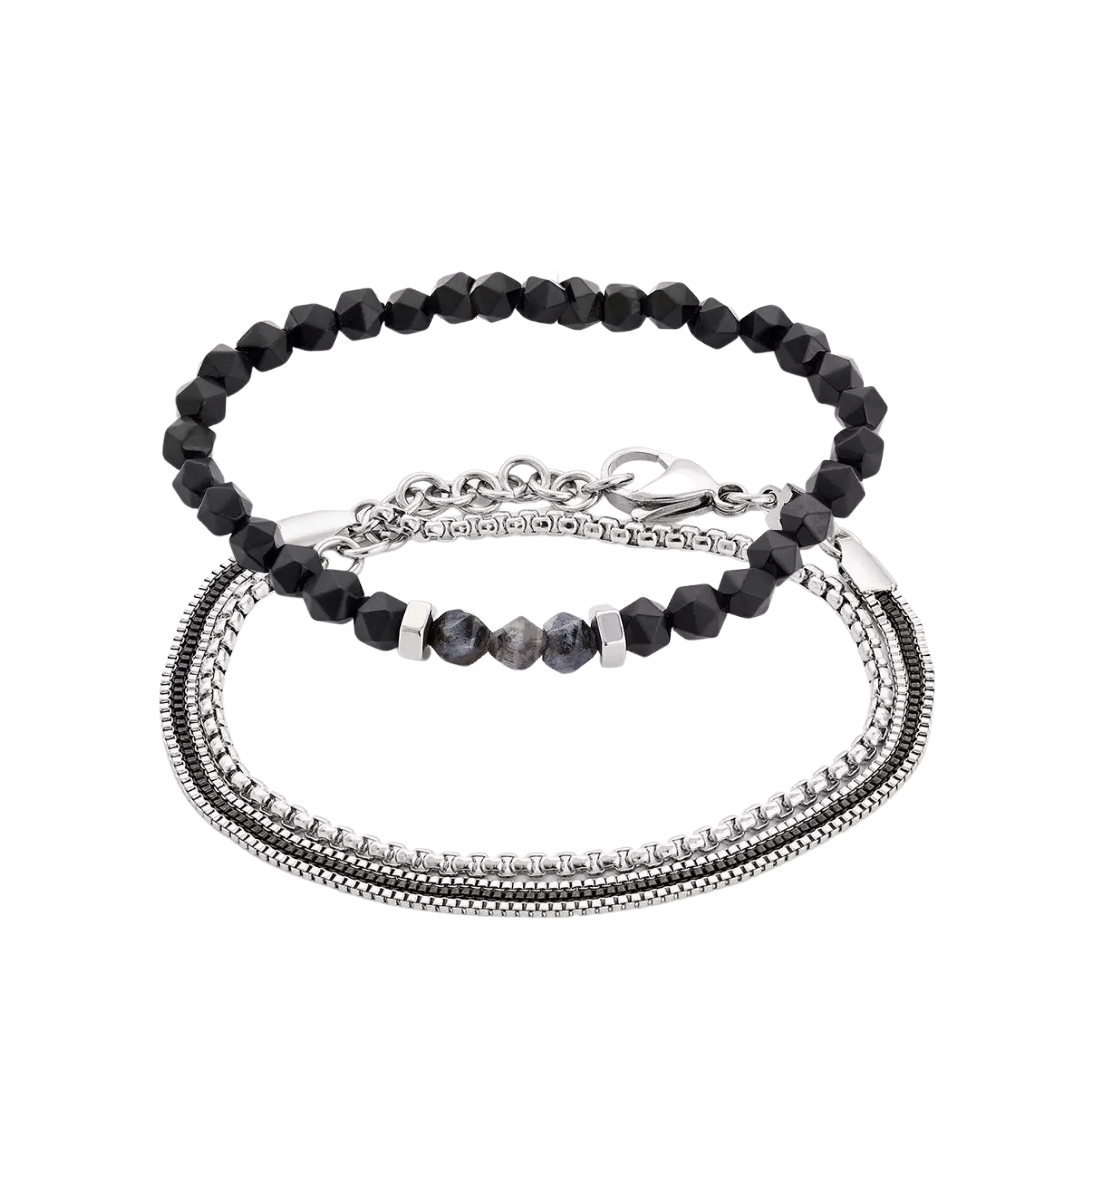 1 Stainless steel layered bracelet with a lobster clasp and 1 6mm diamond cut black Onyx gemstones elastic bracelet 